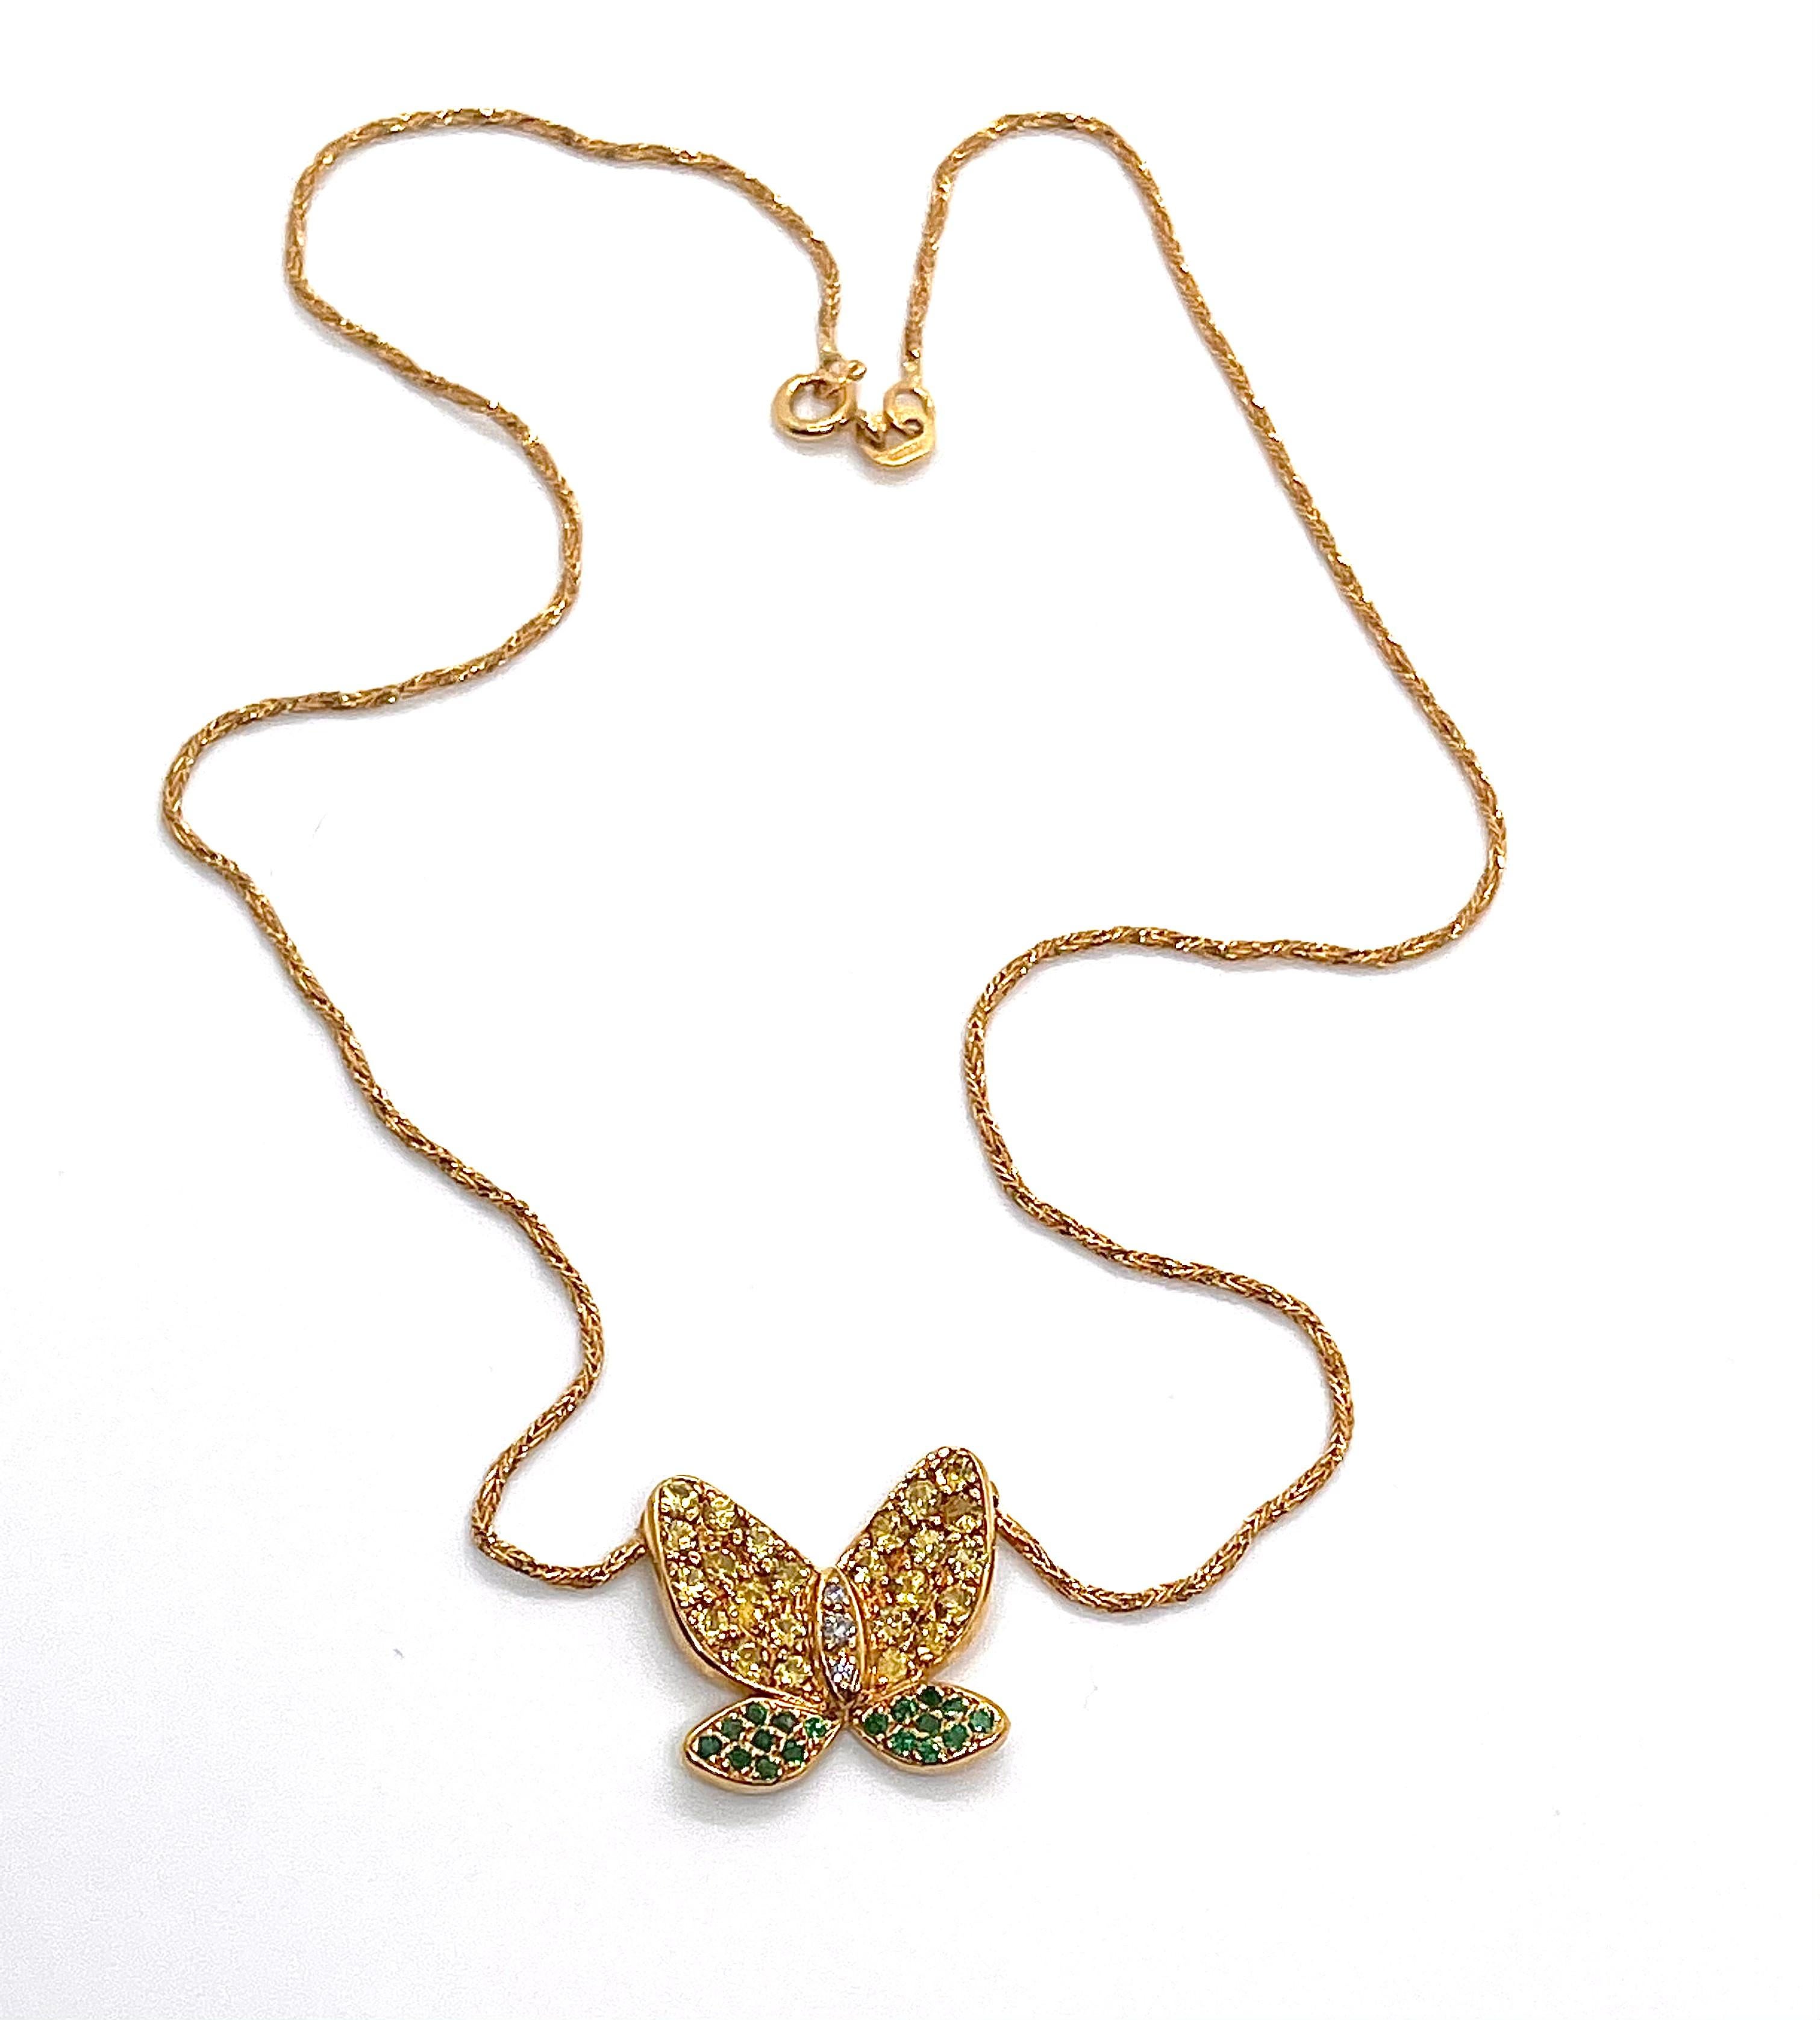 A gorgeous butterfly-shaped colourful necklace, paved with beautiful and rare yellow sapphires, emeralds and diamonds. The necklace is made of 18K yellow gold as the eye-catching butterfly-shaped pendant. The butterfly's upper wings are paved with